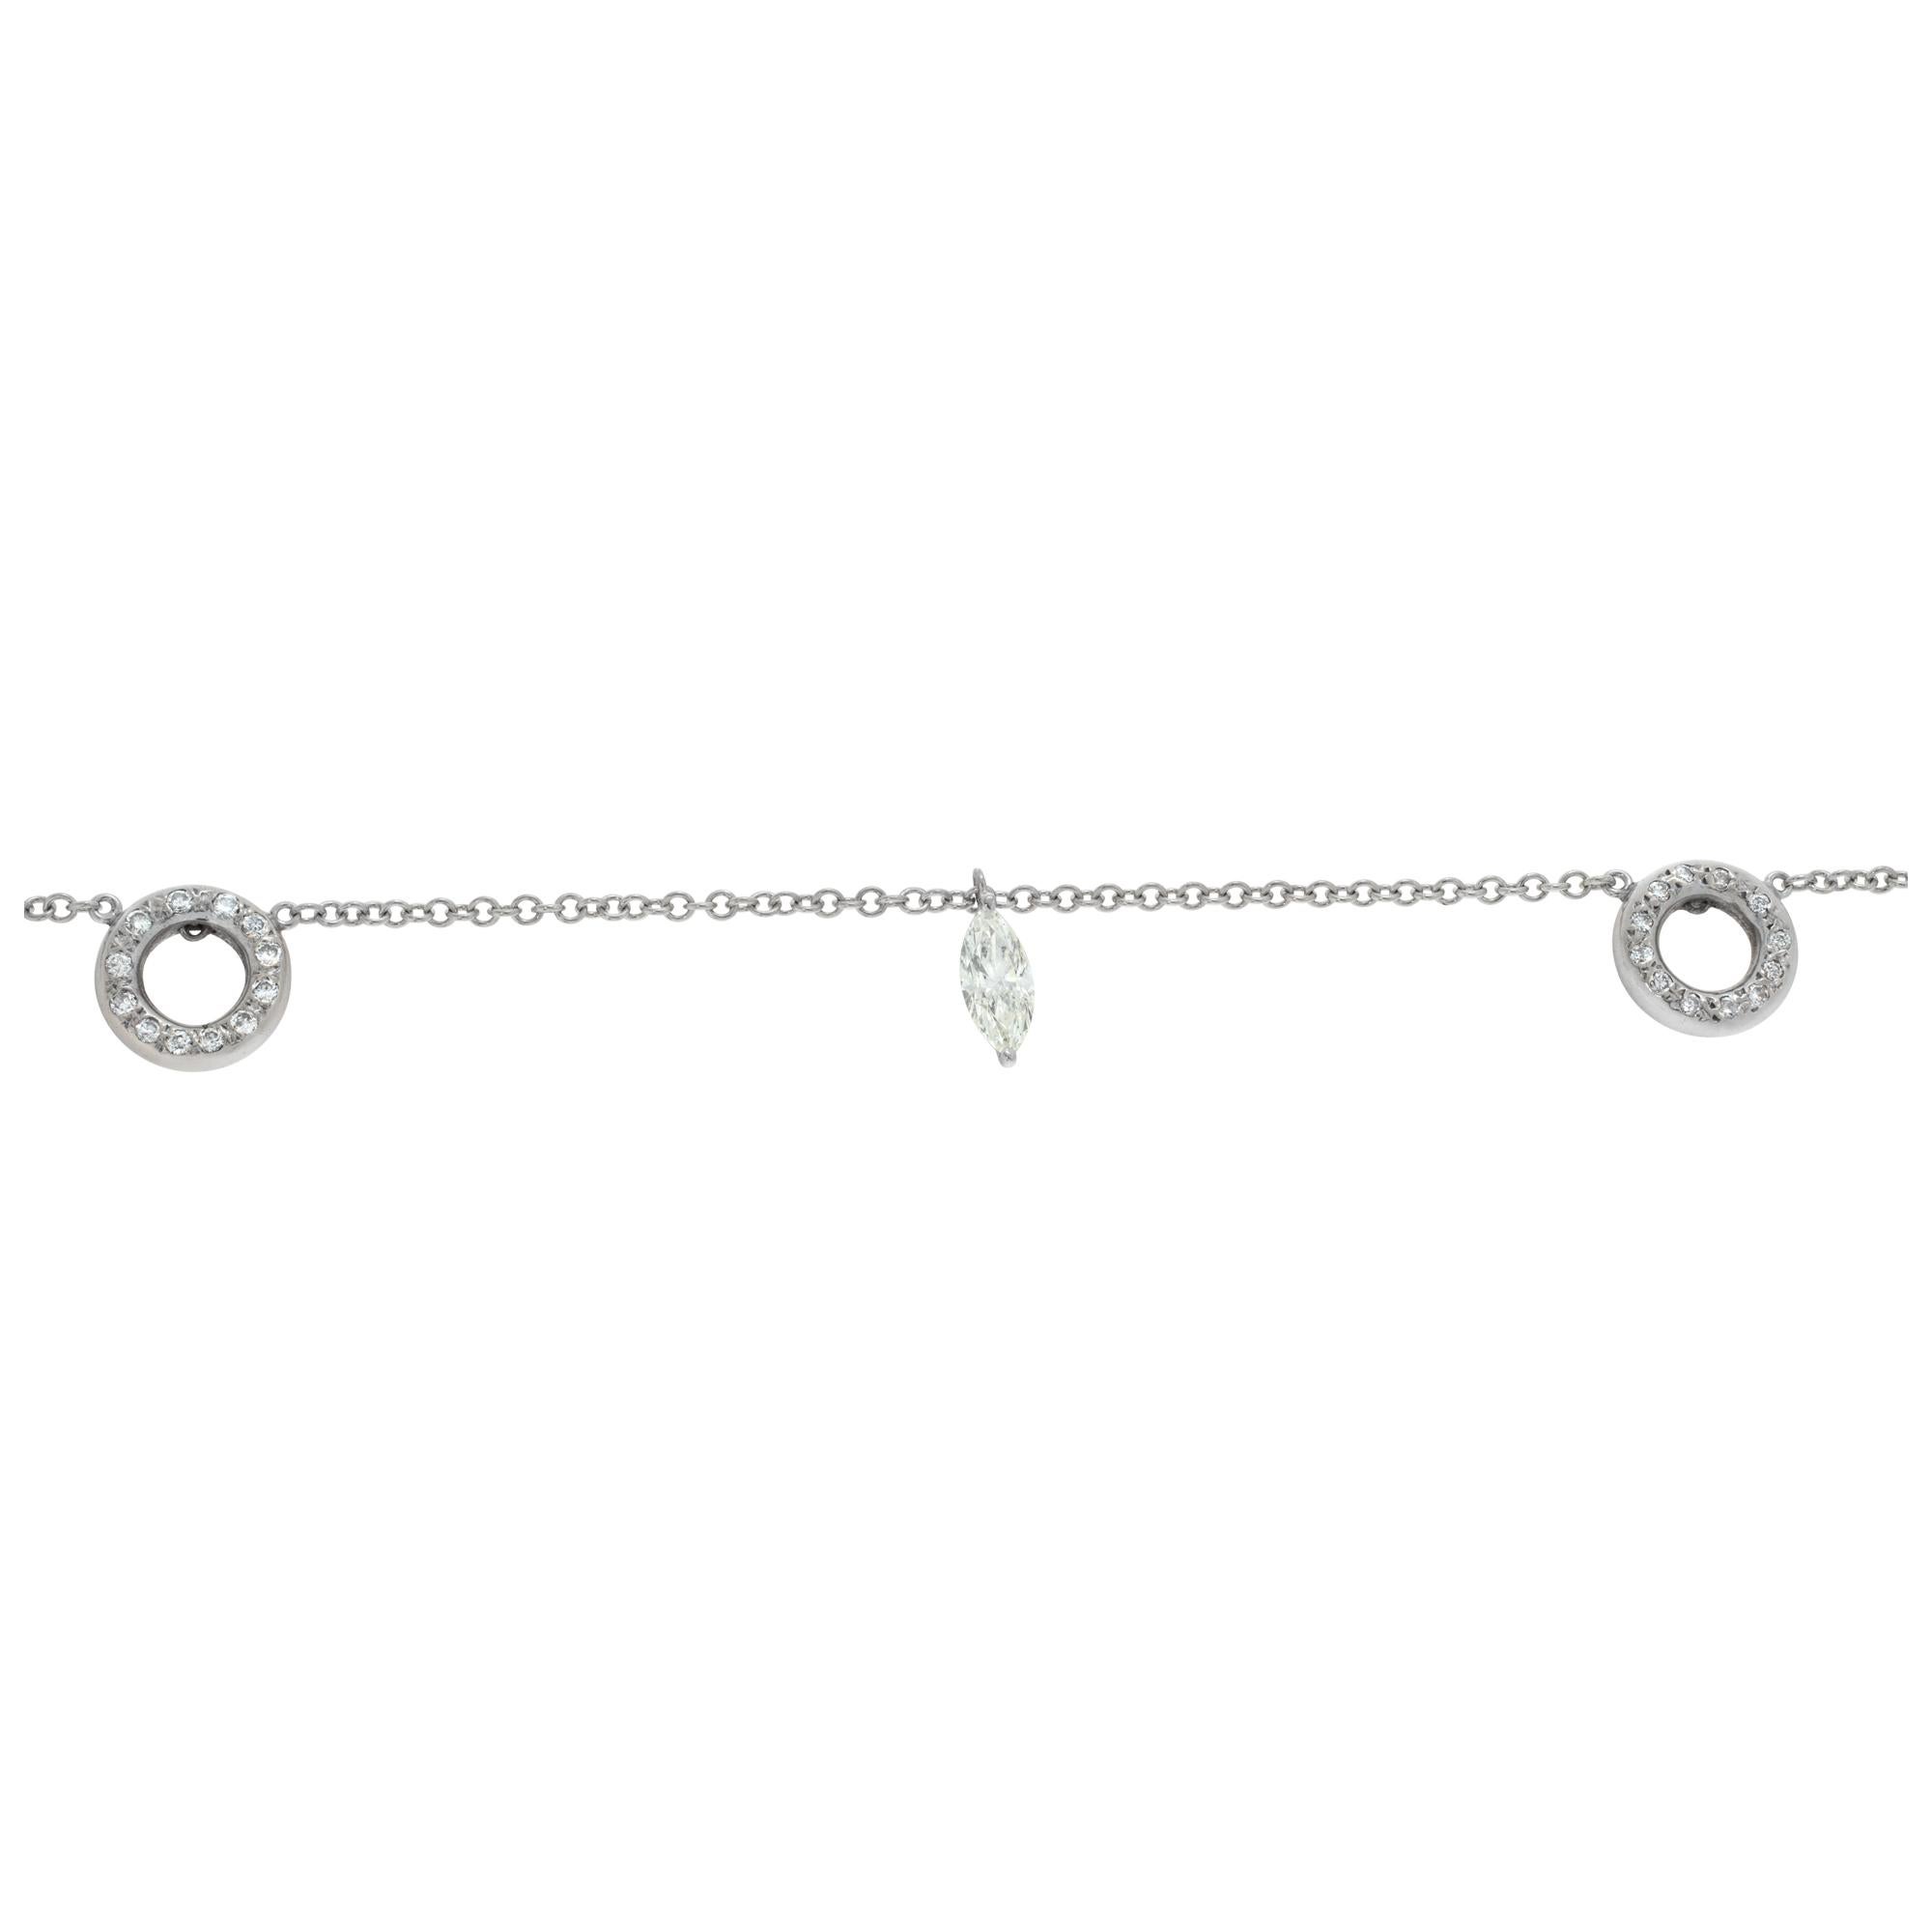 Minimal 18k white gold bracelet with approx.0.50 carat marquise diamond I-J color, SI clarity. Length 7.5 inches. Made in Italy.
